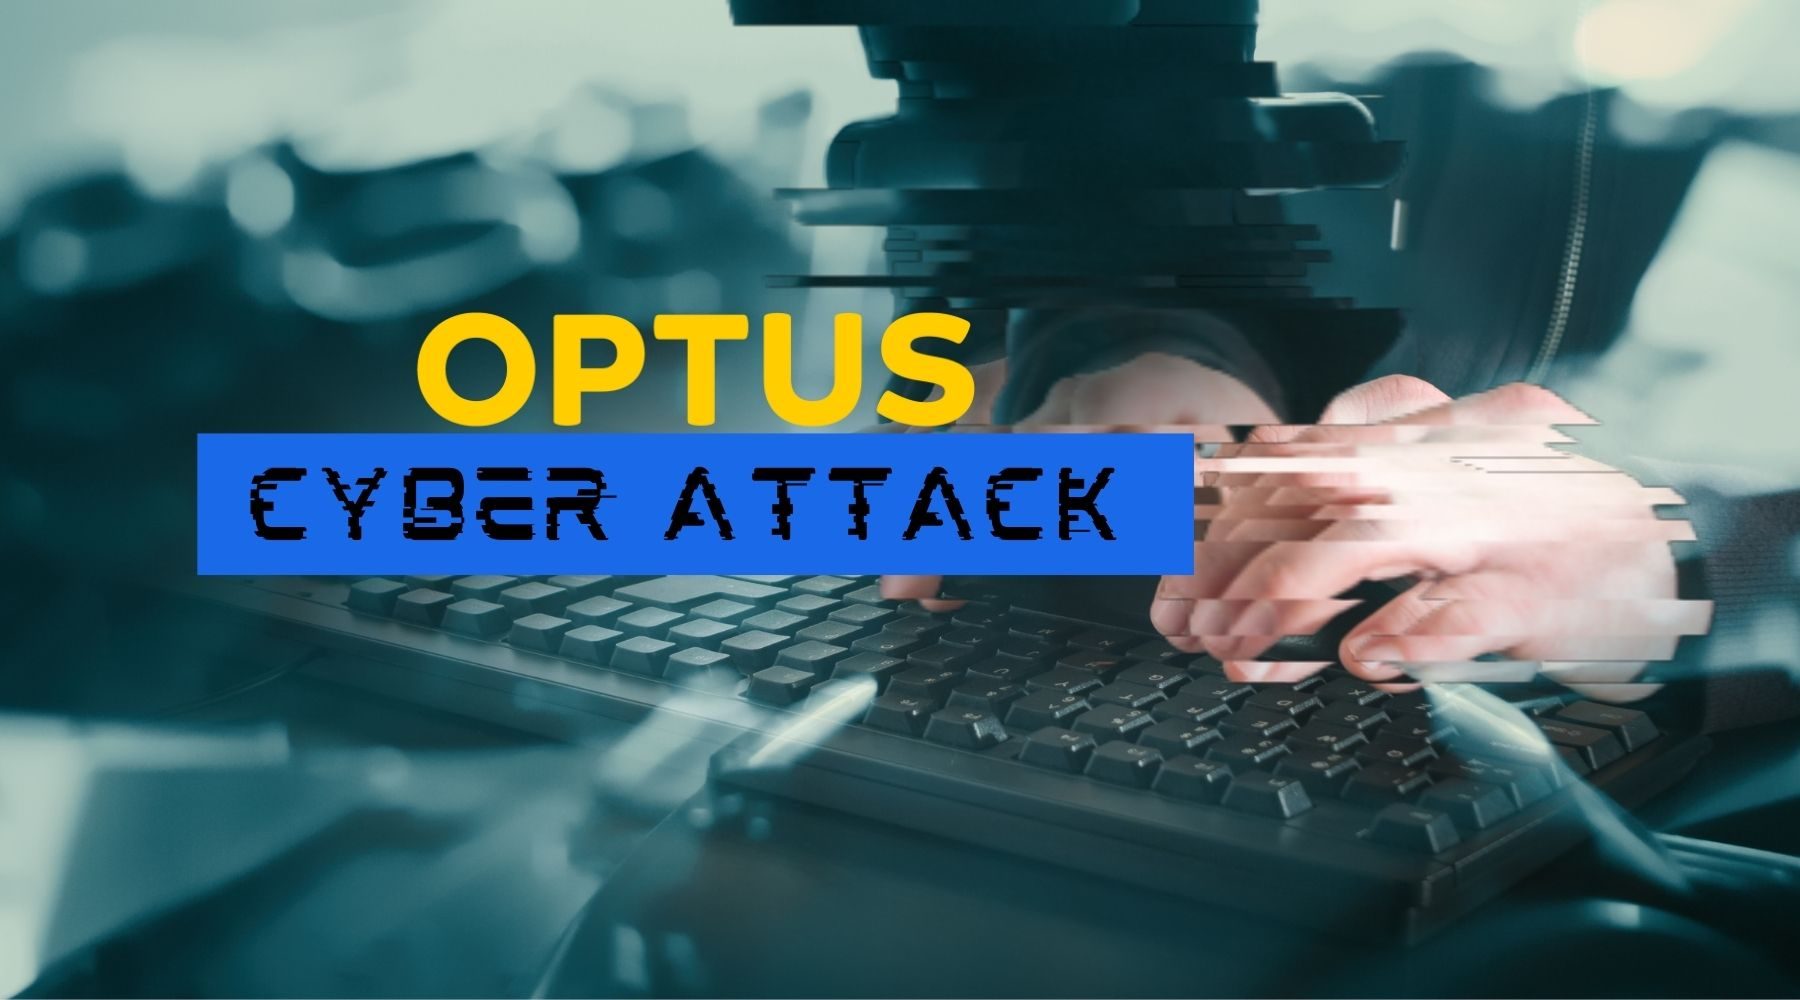 hands typing on keyword and wording over image that reads: Optus Cyber Attack